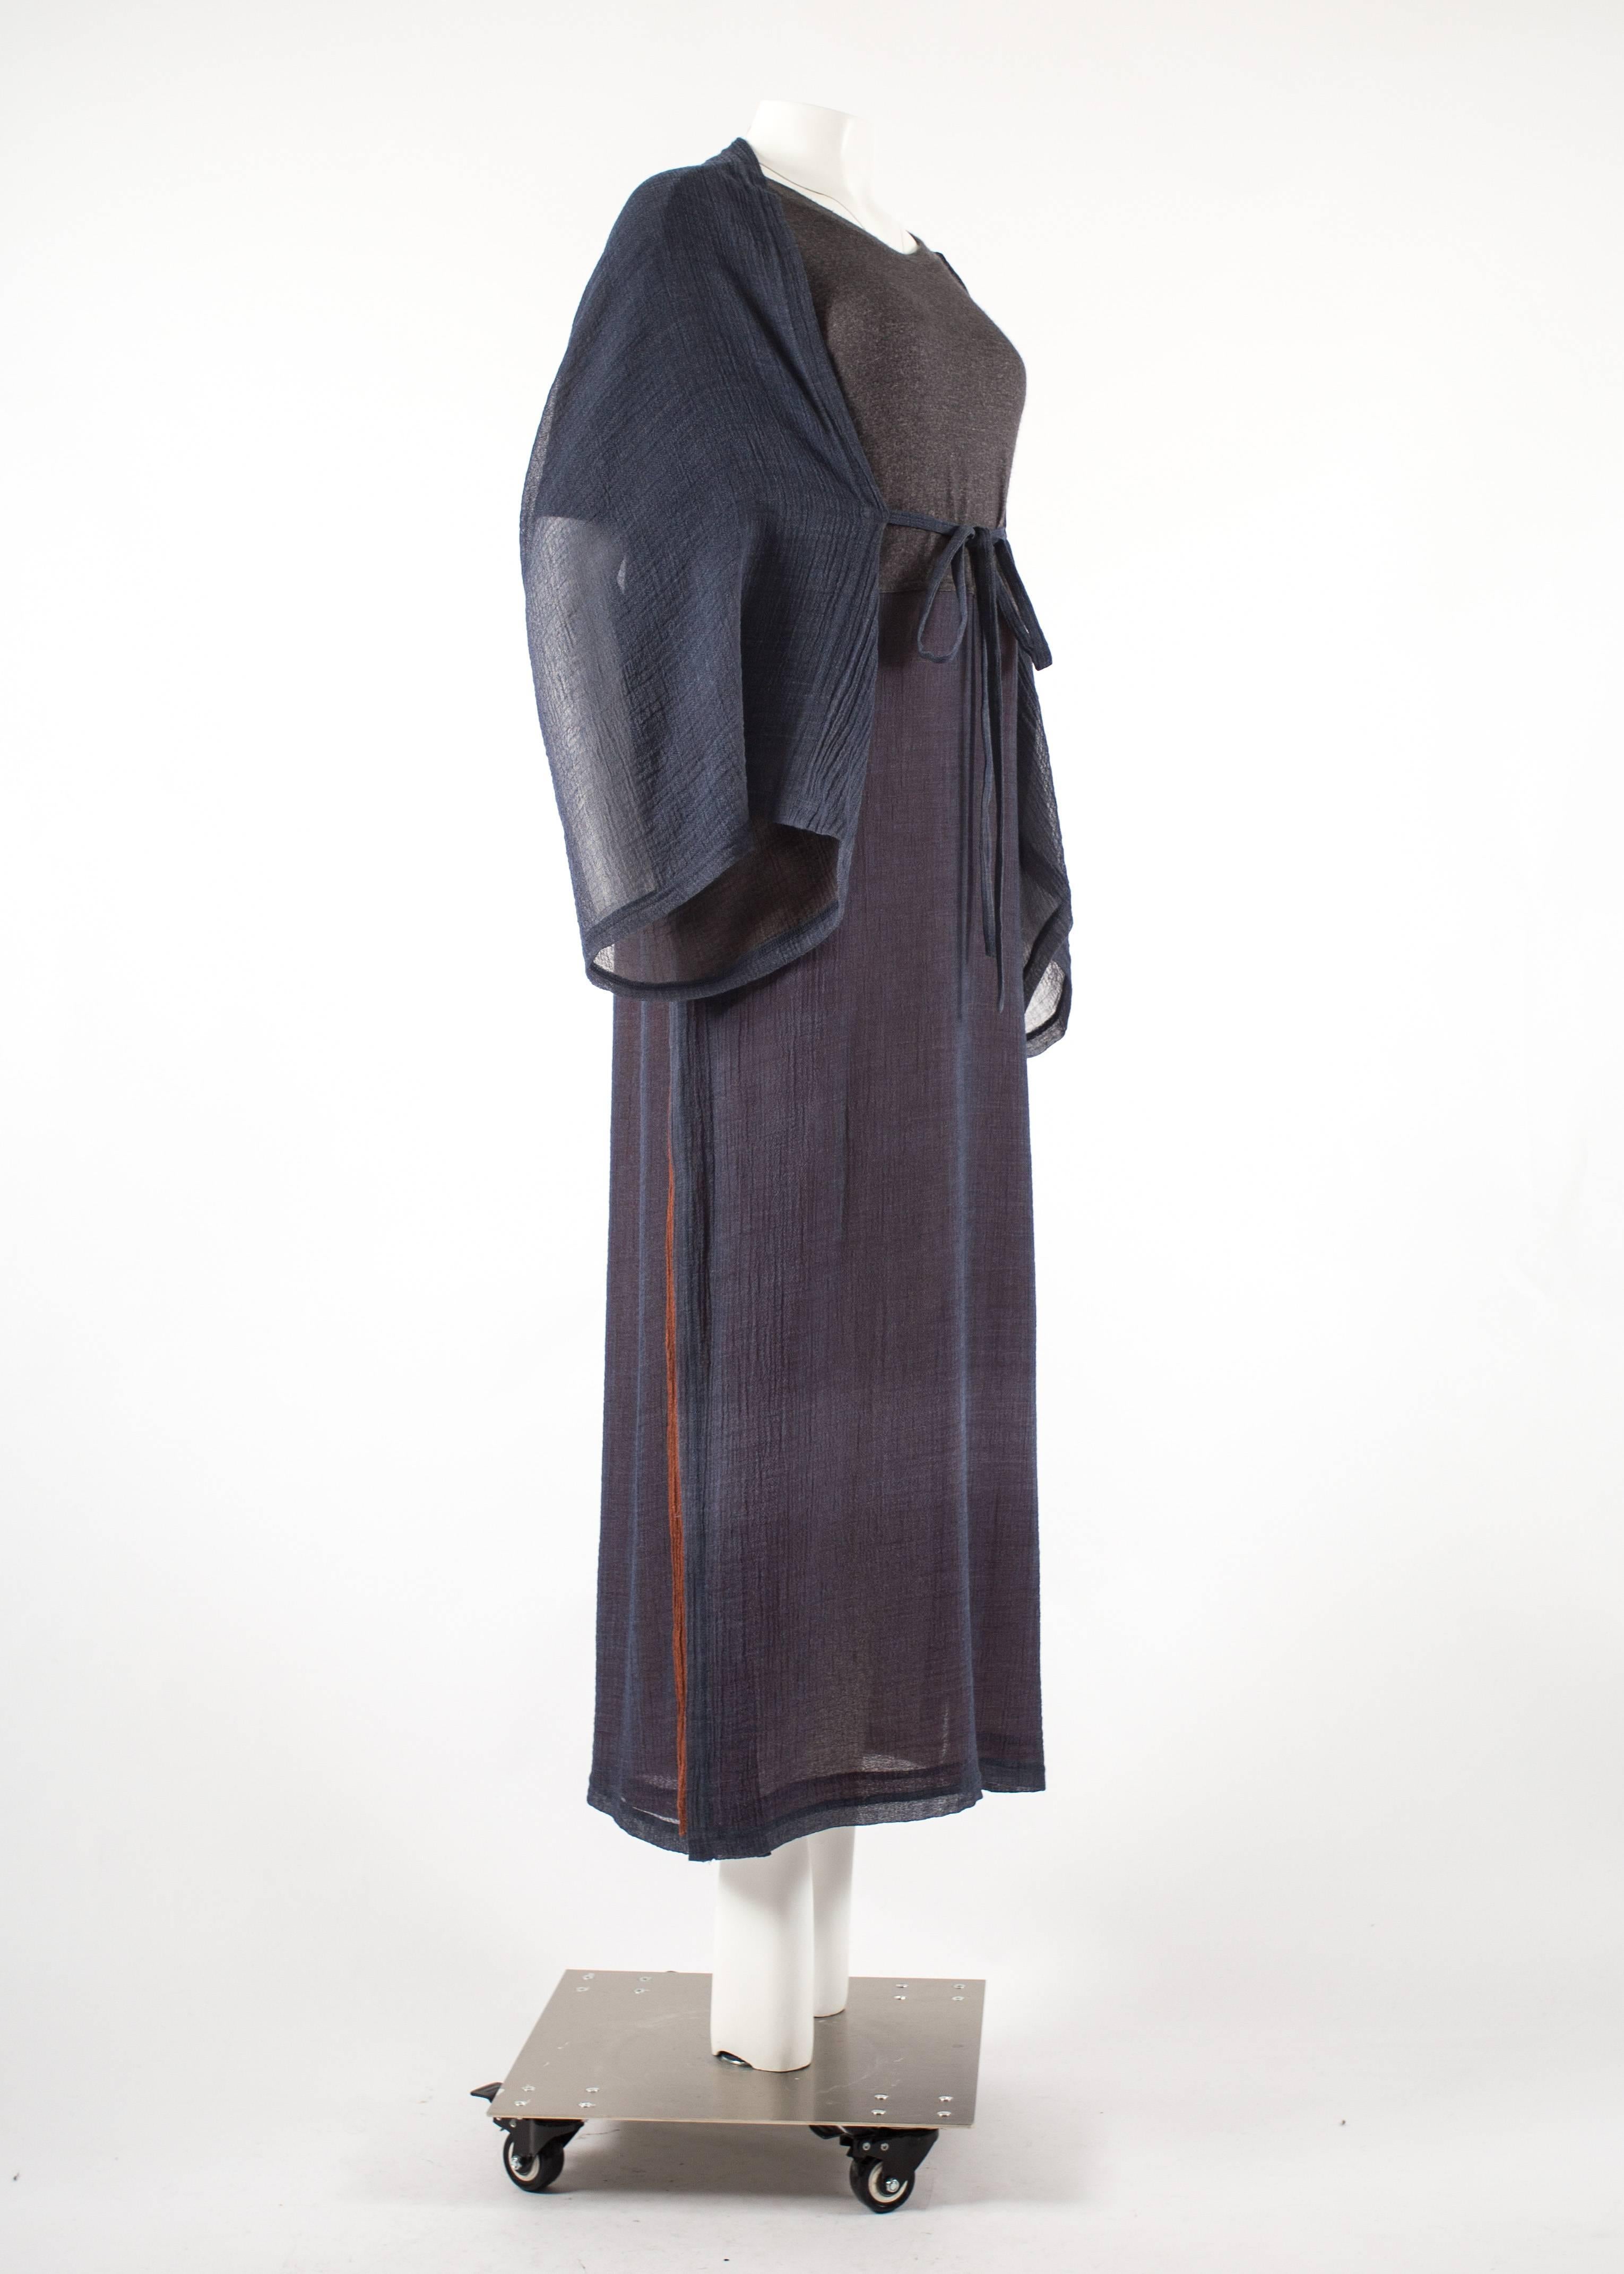 Women's Issey Miayke tricolour layered t-shirt dress with integrated cardigan, c. 1990s For Sale